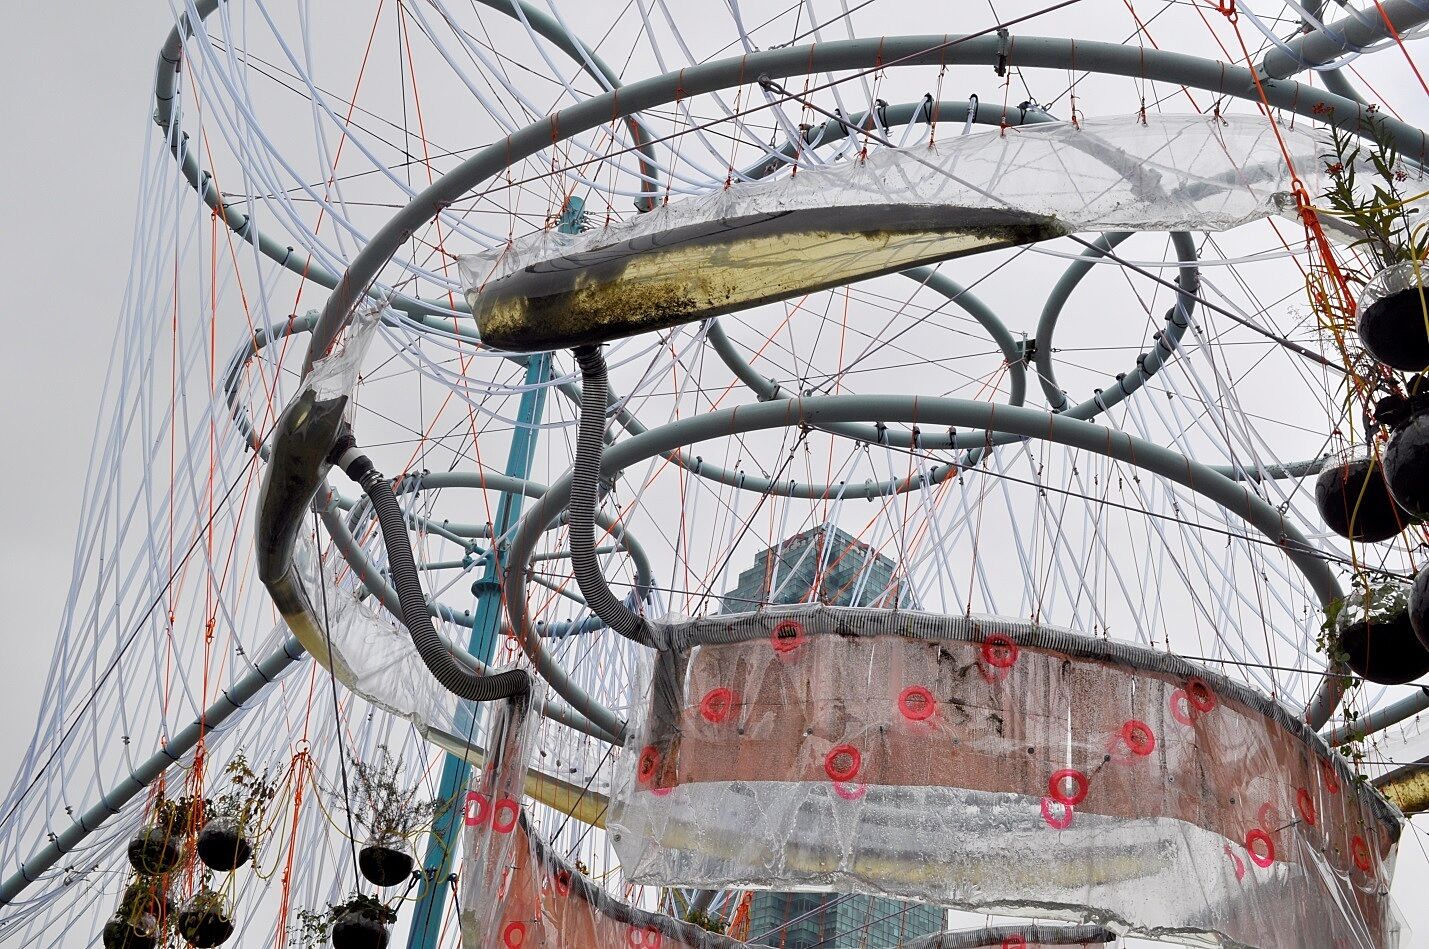 large installation made up of strings and metal hoops